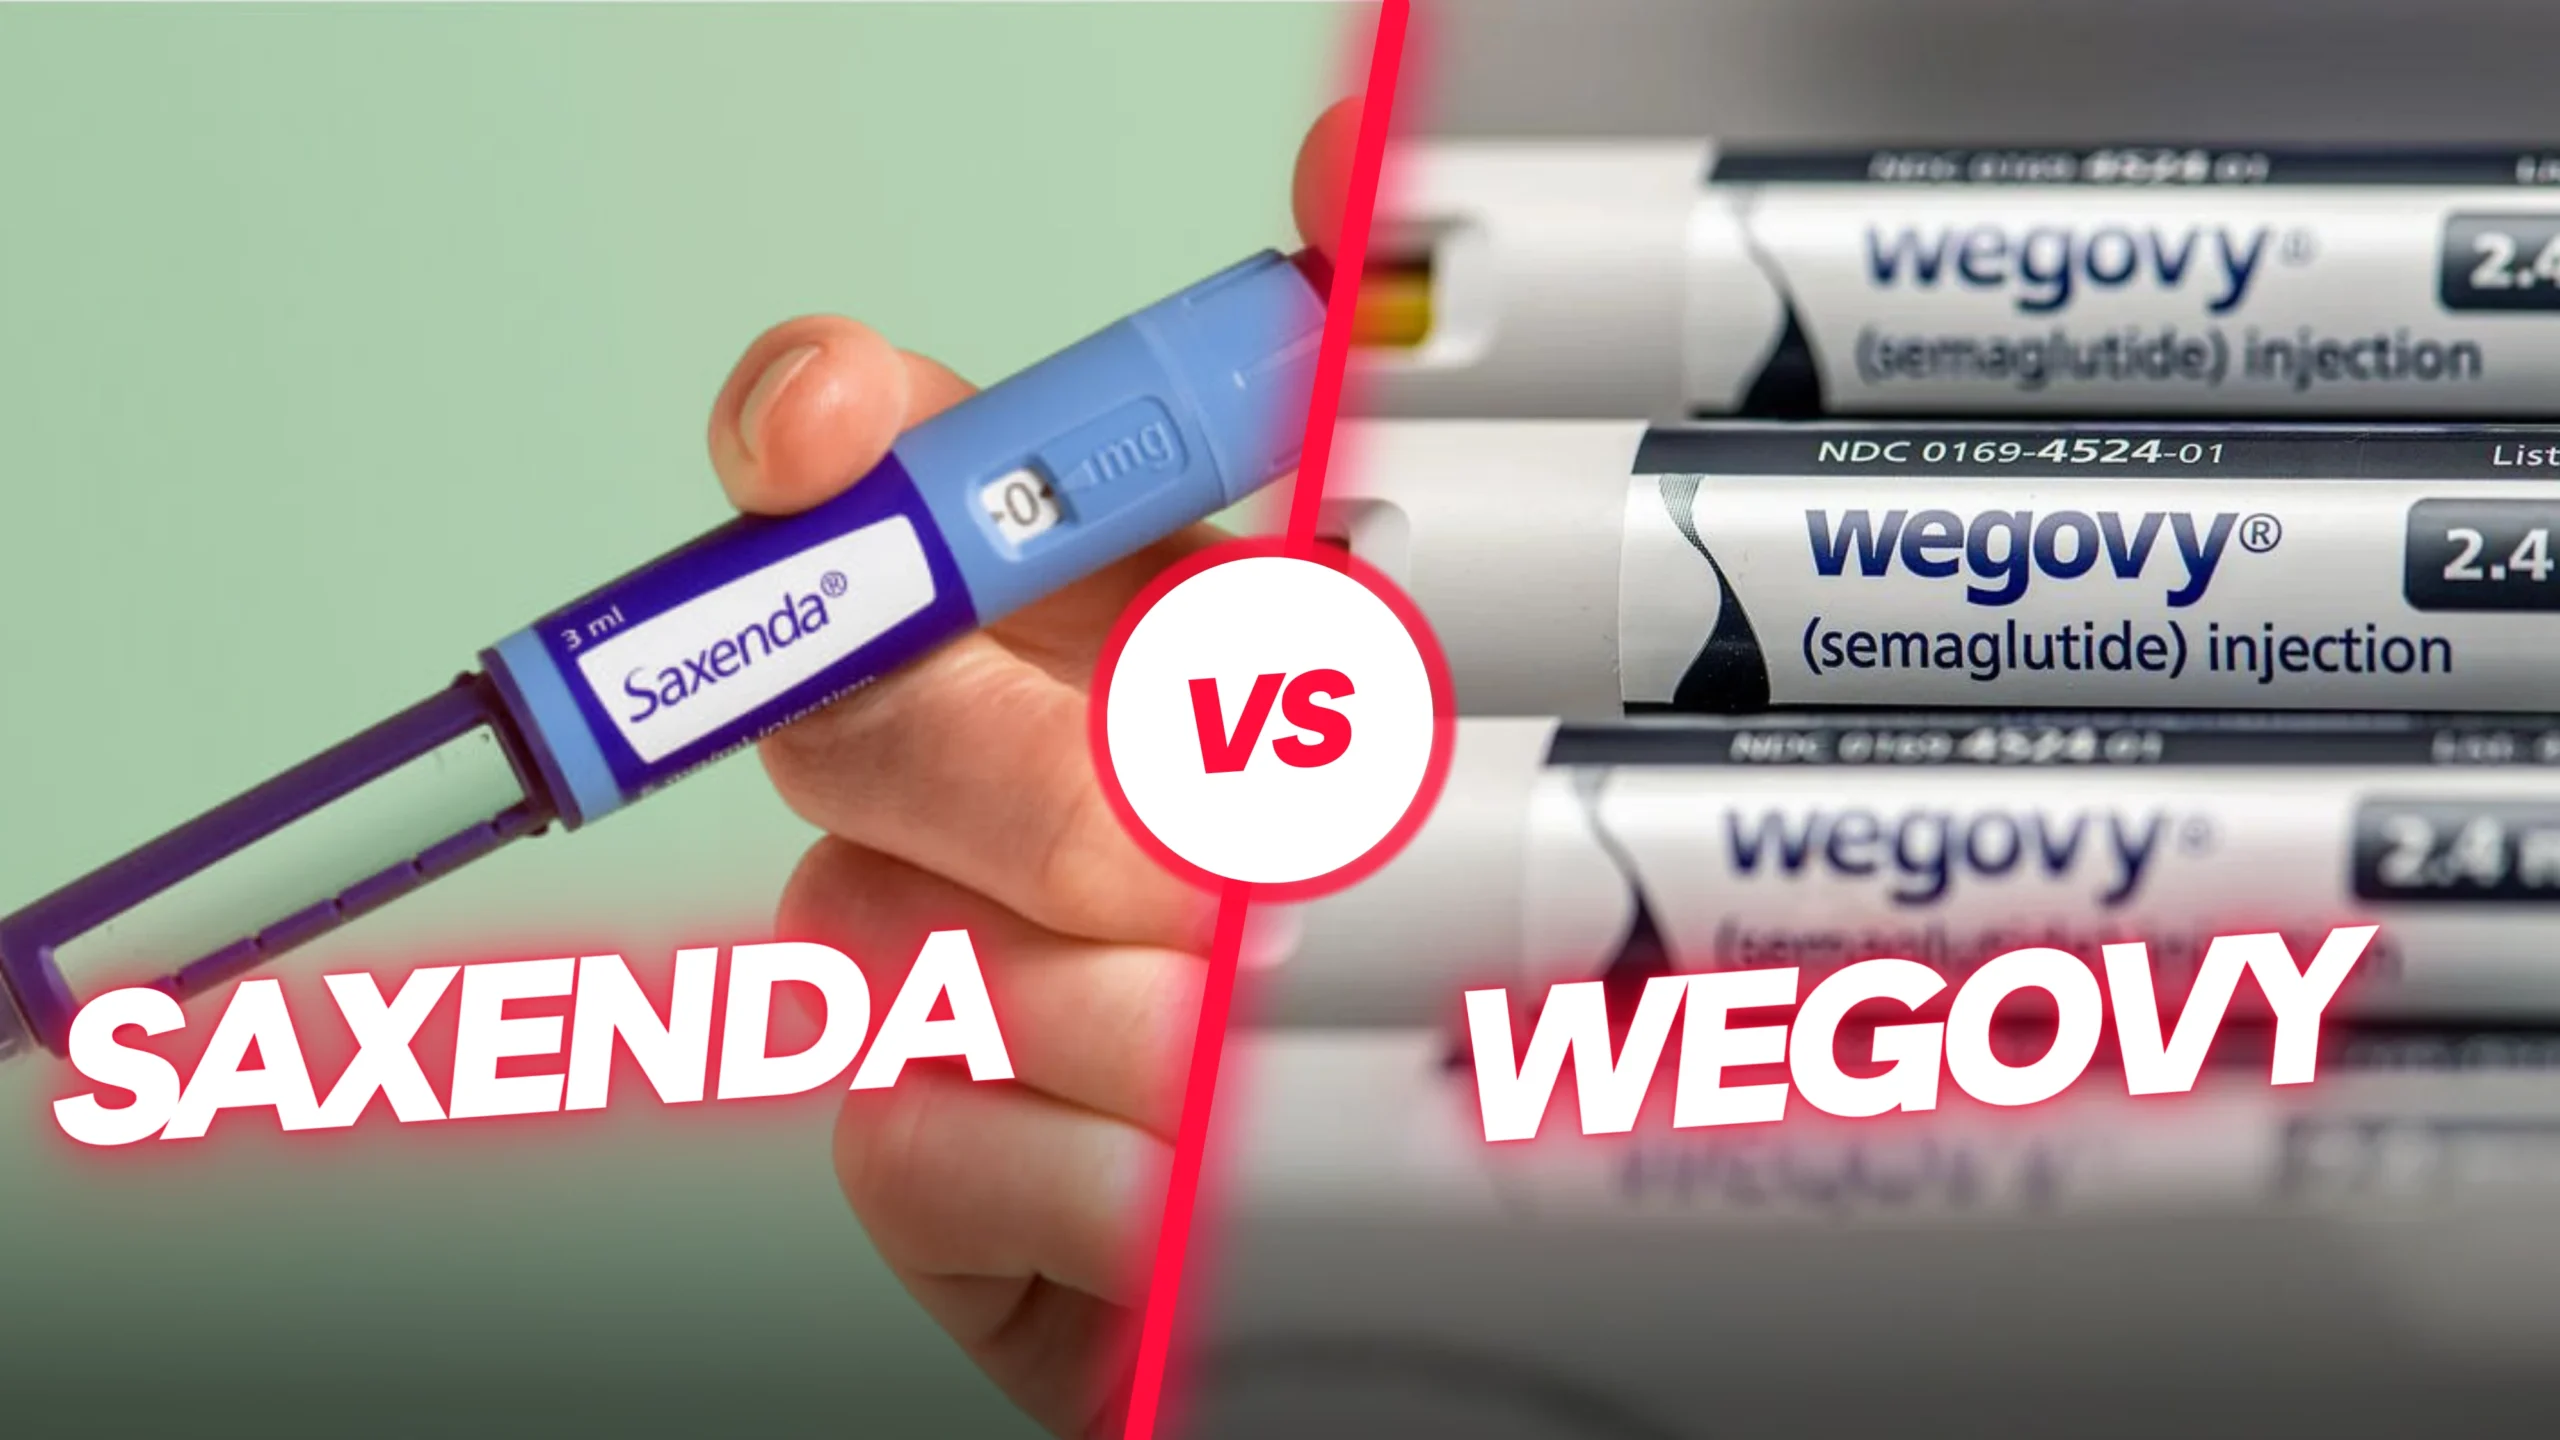 The Differences Between Saxenda and Wegovy